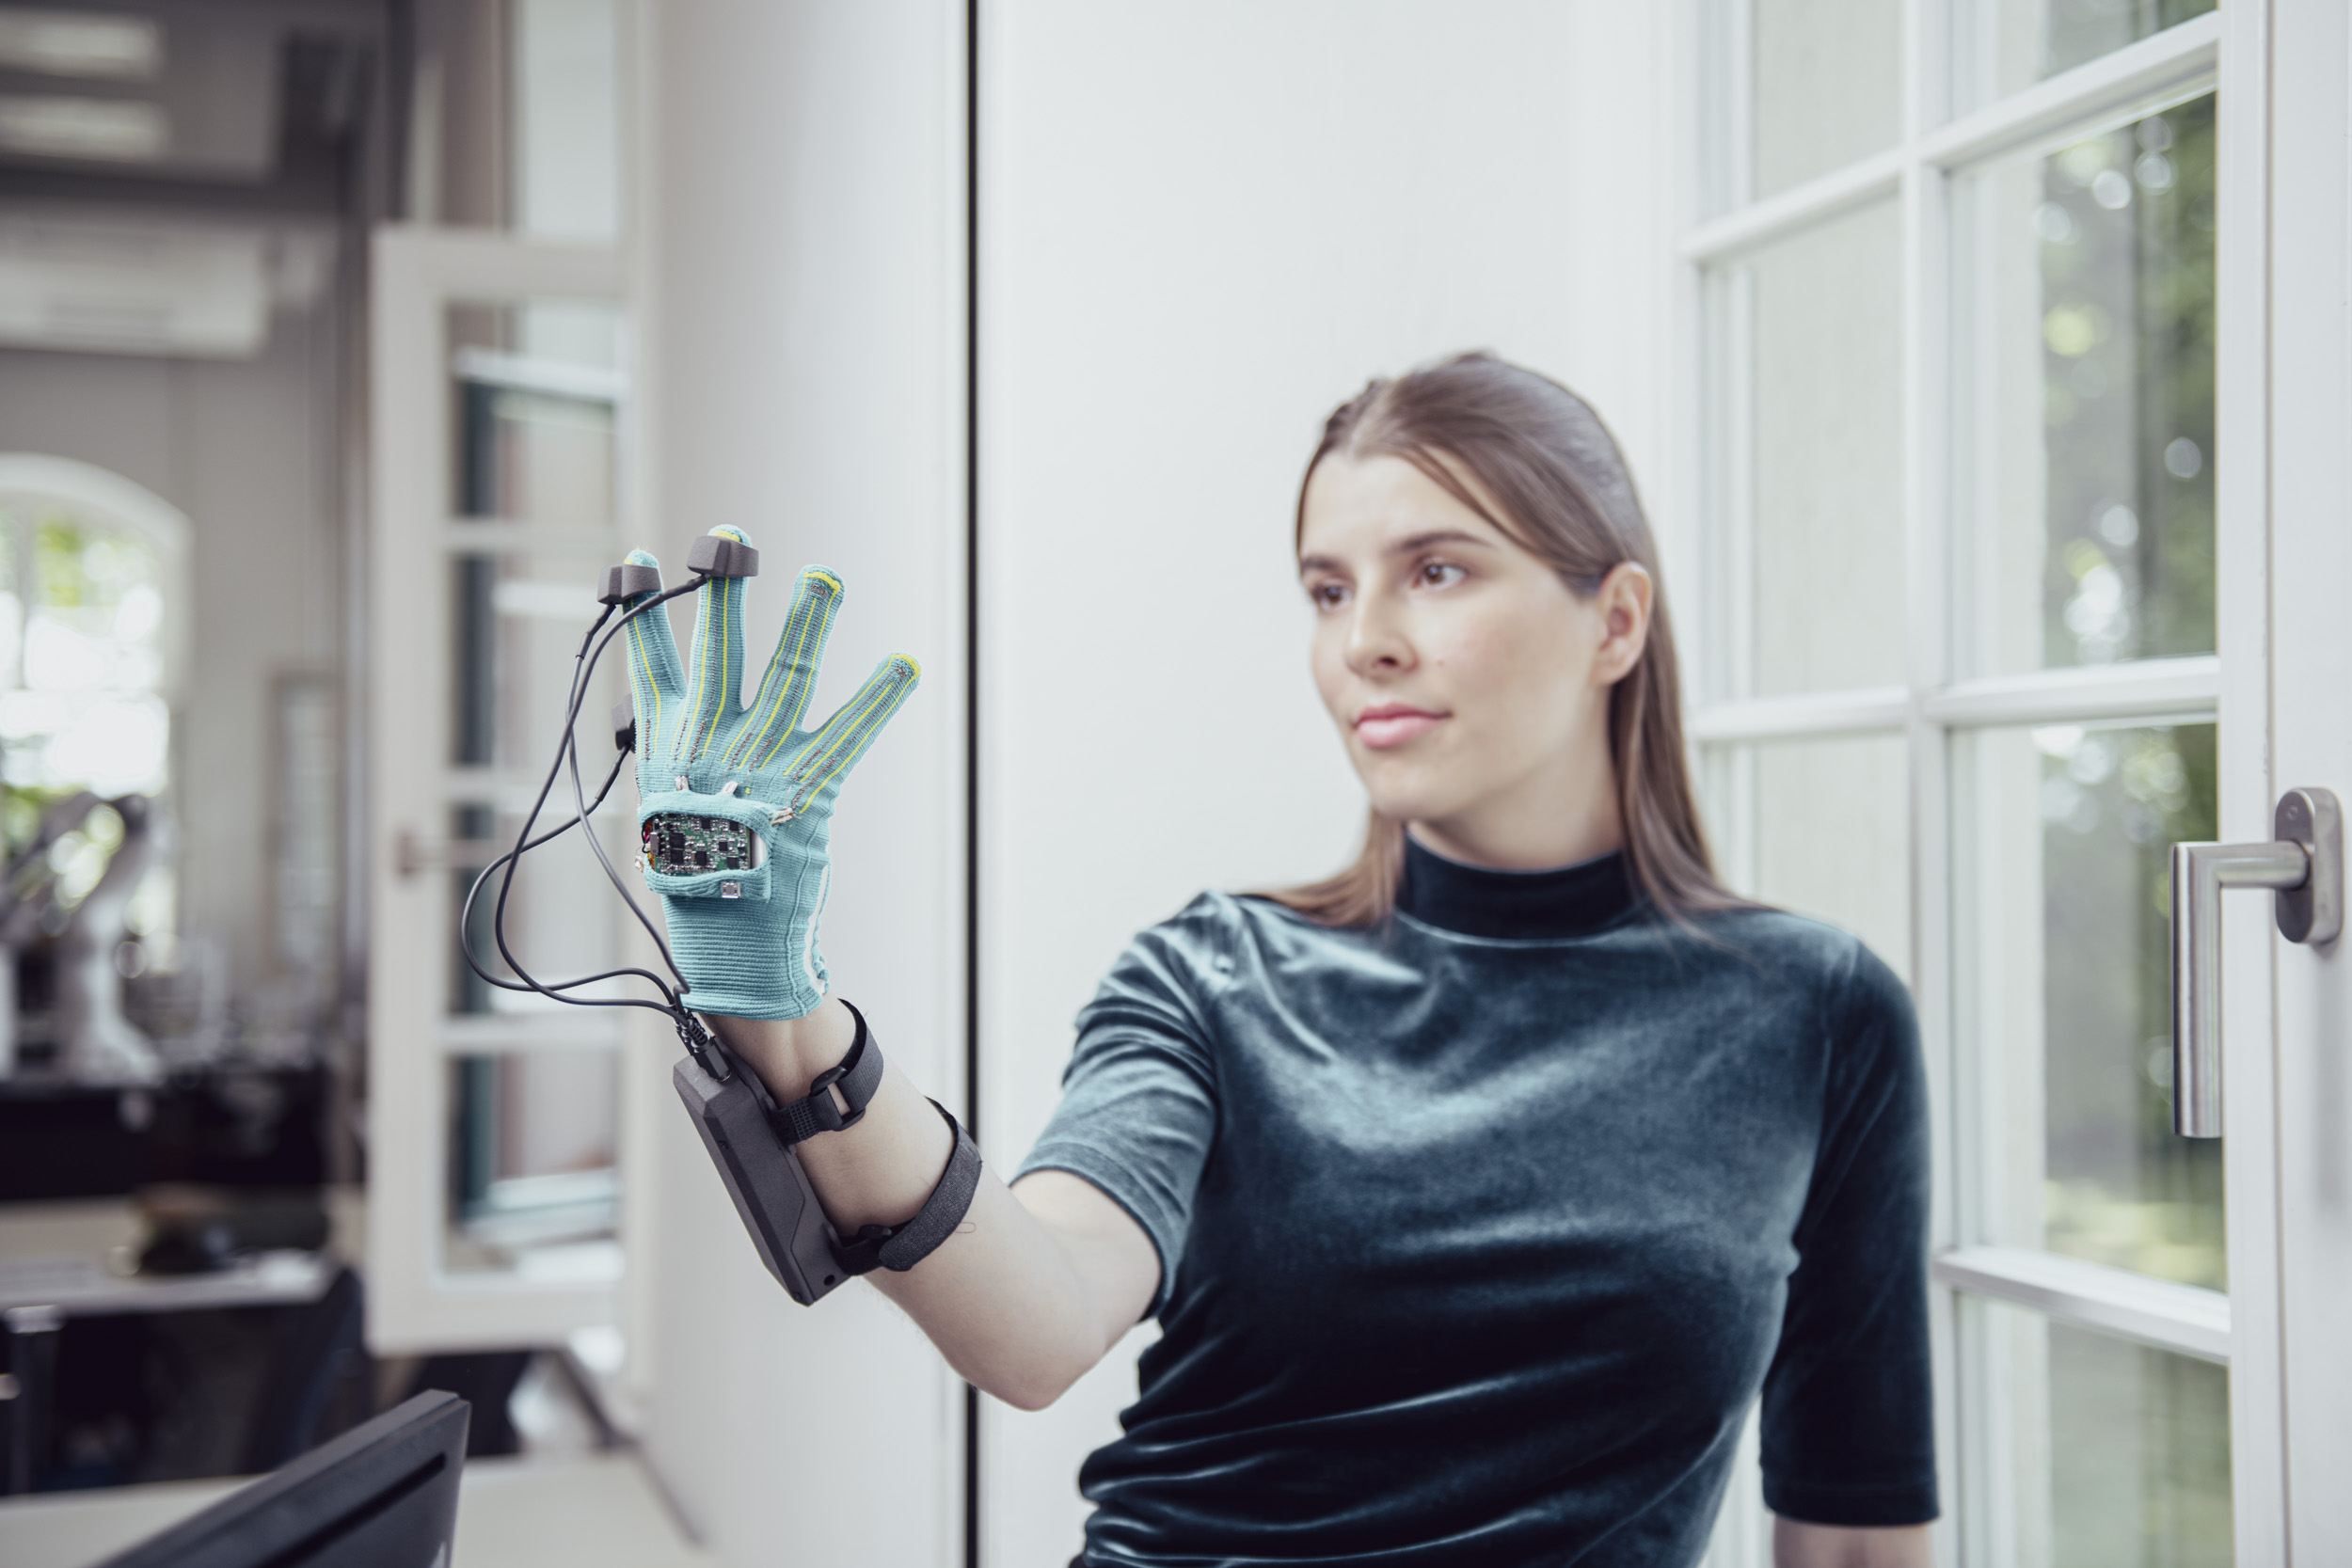 A woman standing next to a window wearing a smart glove with sensors attached to her arm